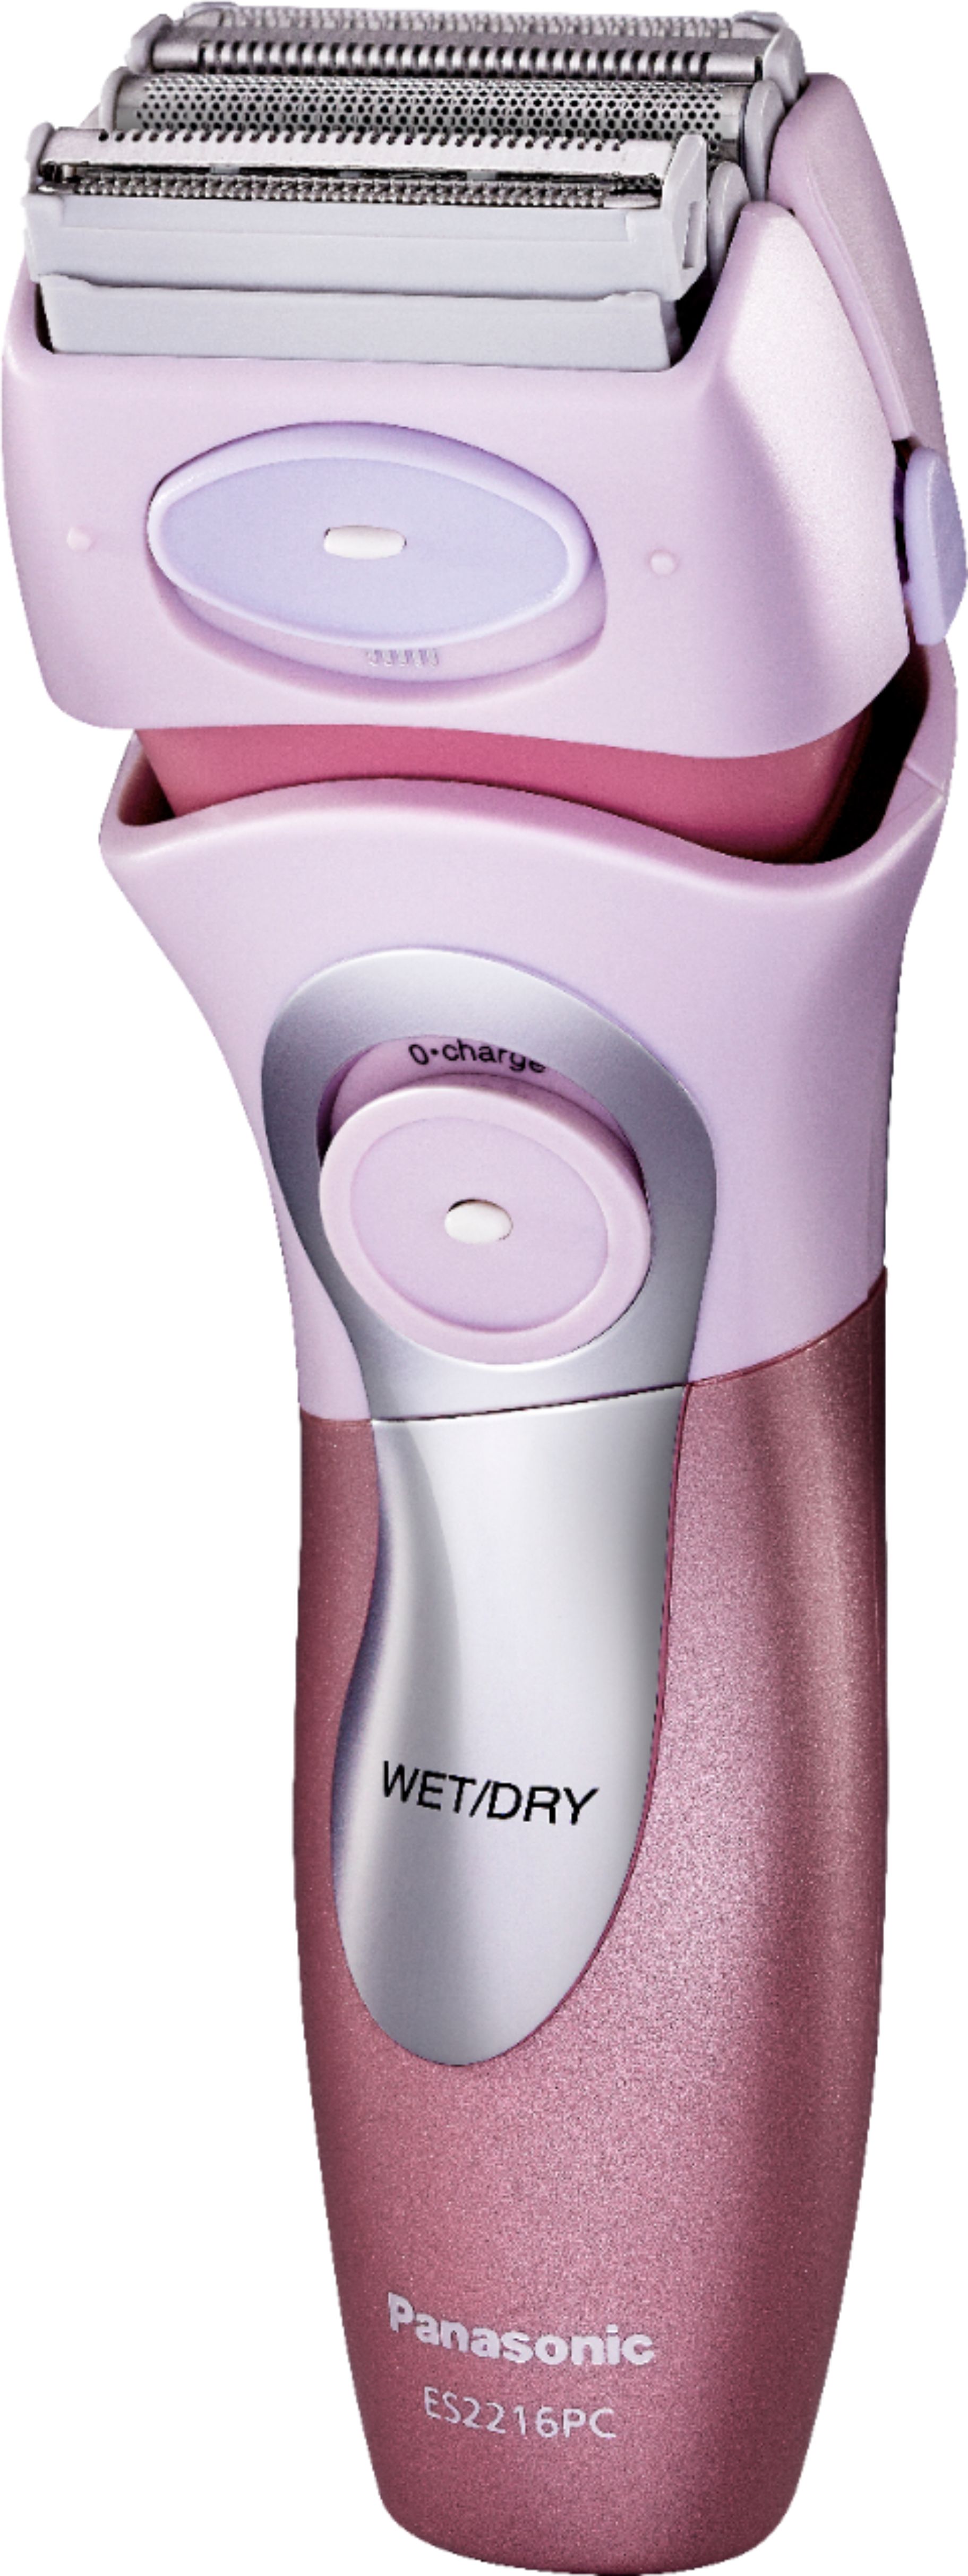 Angle View: Panasonic ES2216PC Women's 4-Blade Electric Shaver with Bikini Attacvhment, Wet/Dry